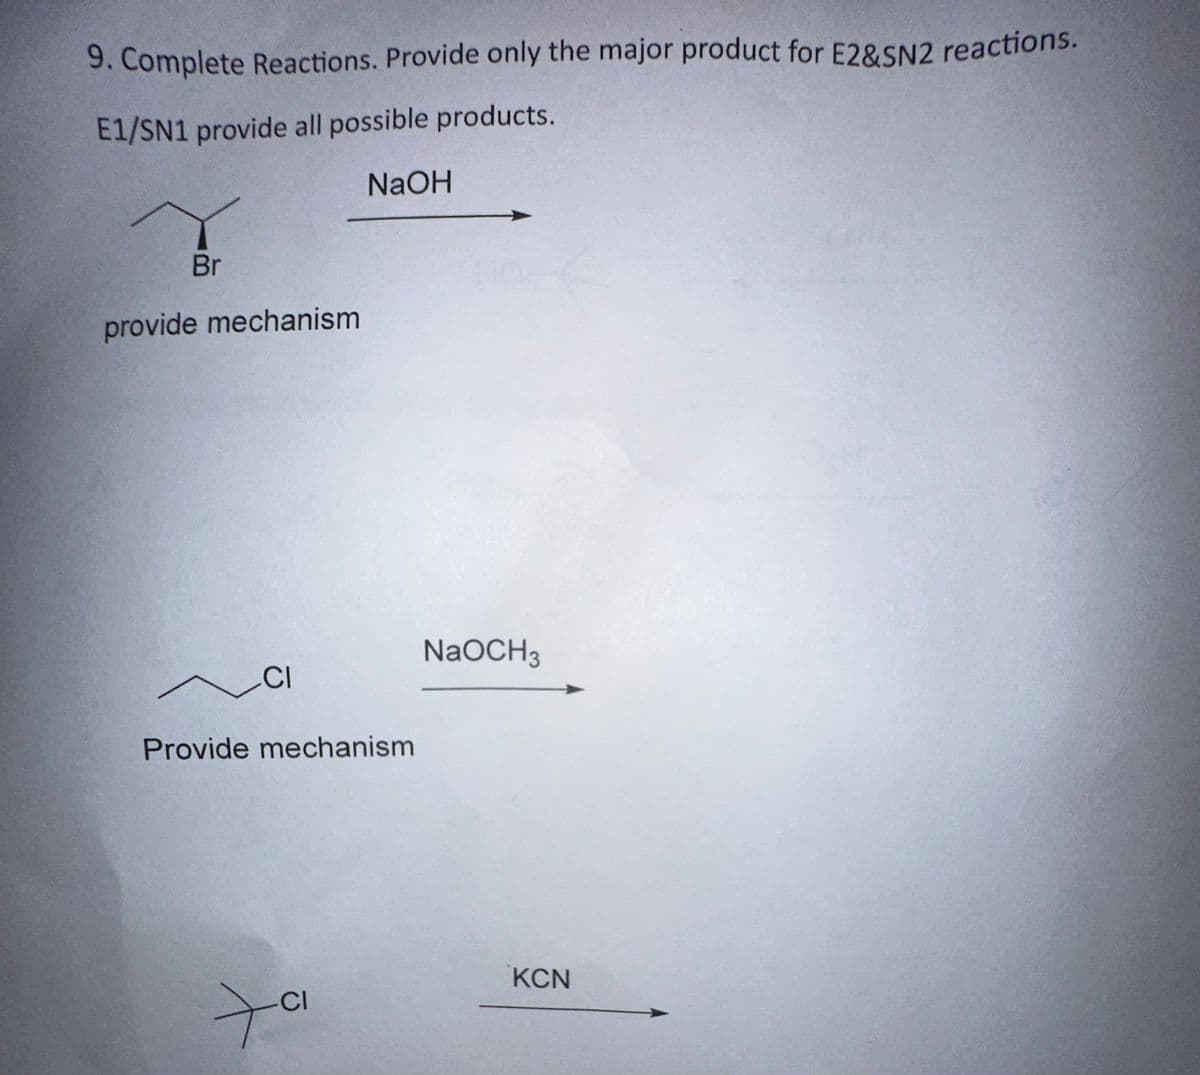 9. Complete Reactions. Provide only the major product for E2&SN2 reactions.
E1/SN1 provide all possible products.
NaOH
Br
provide mechanism
CI
Provide mechanism
+
CI
NaOCH 3
KCN